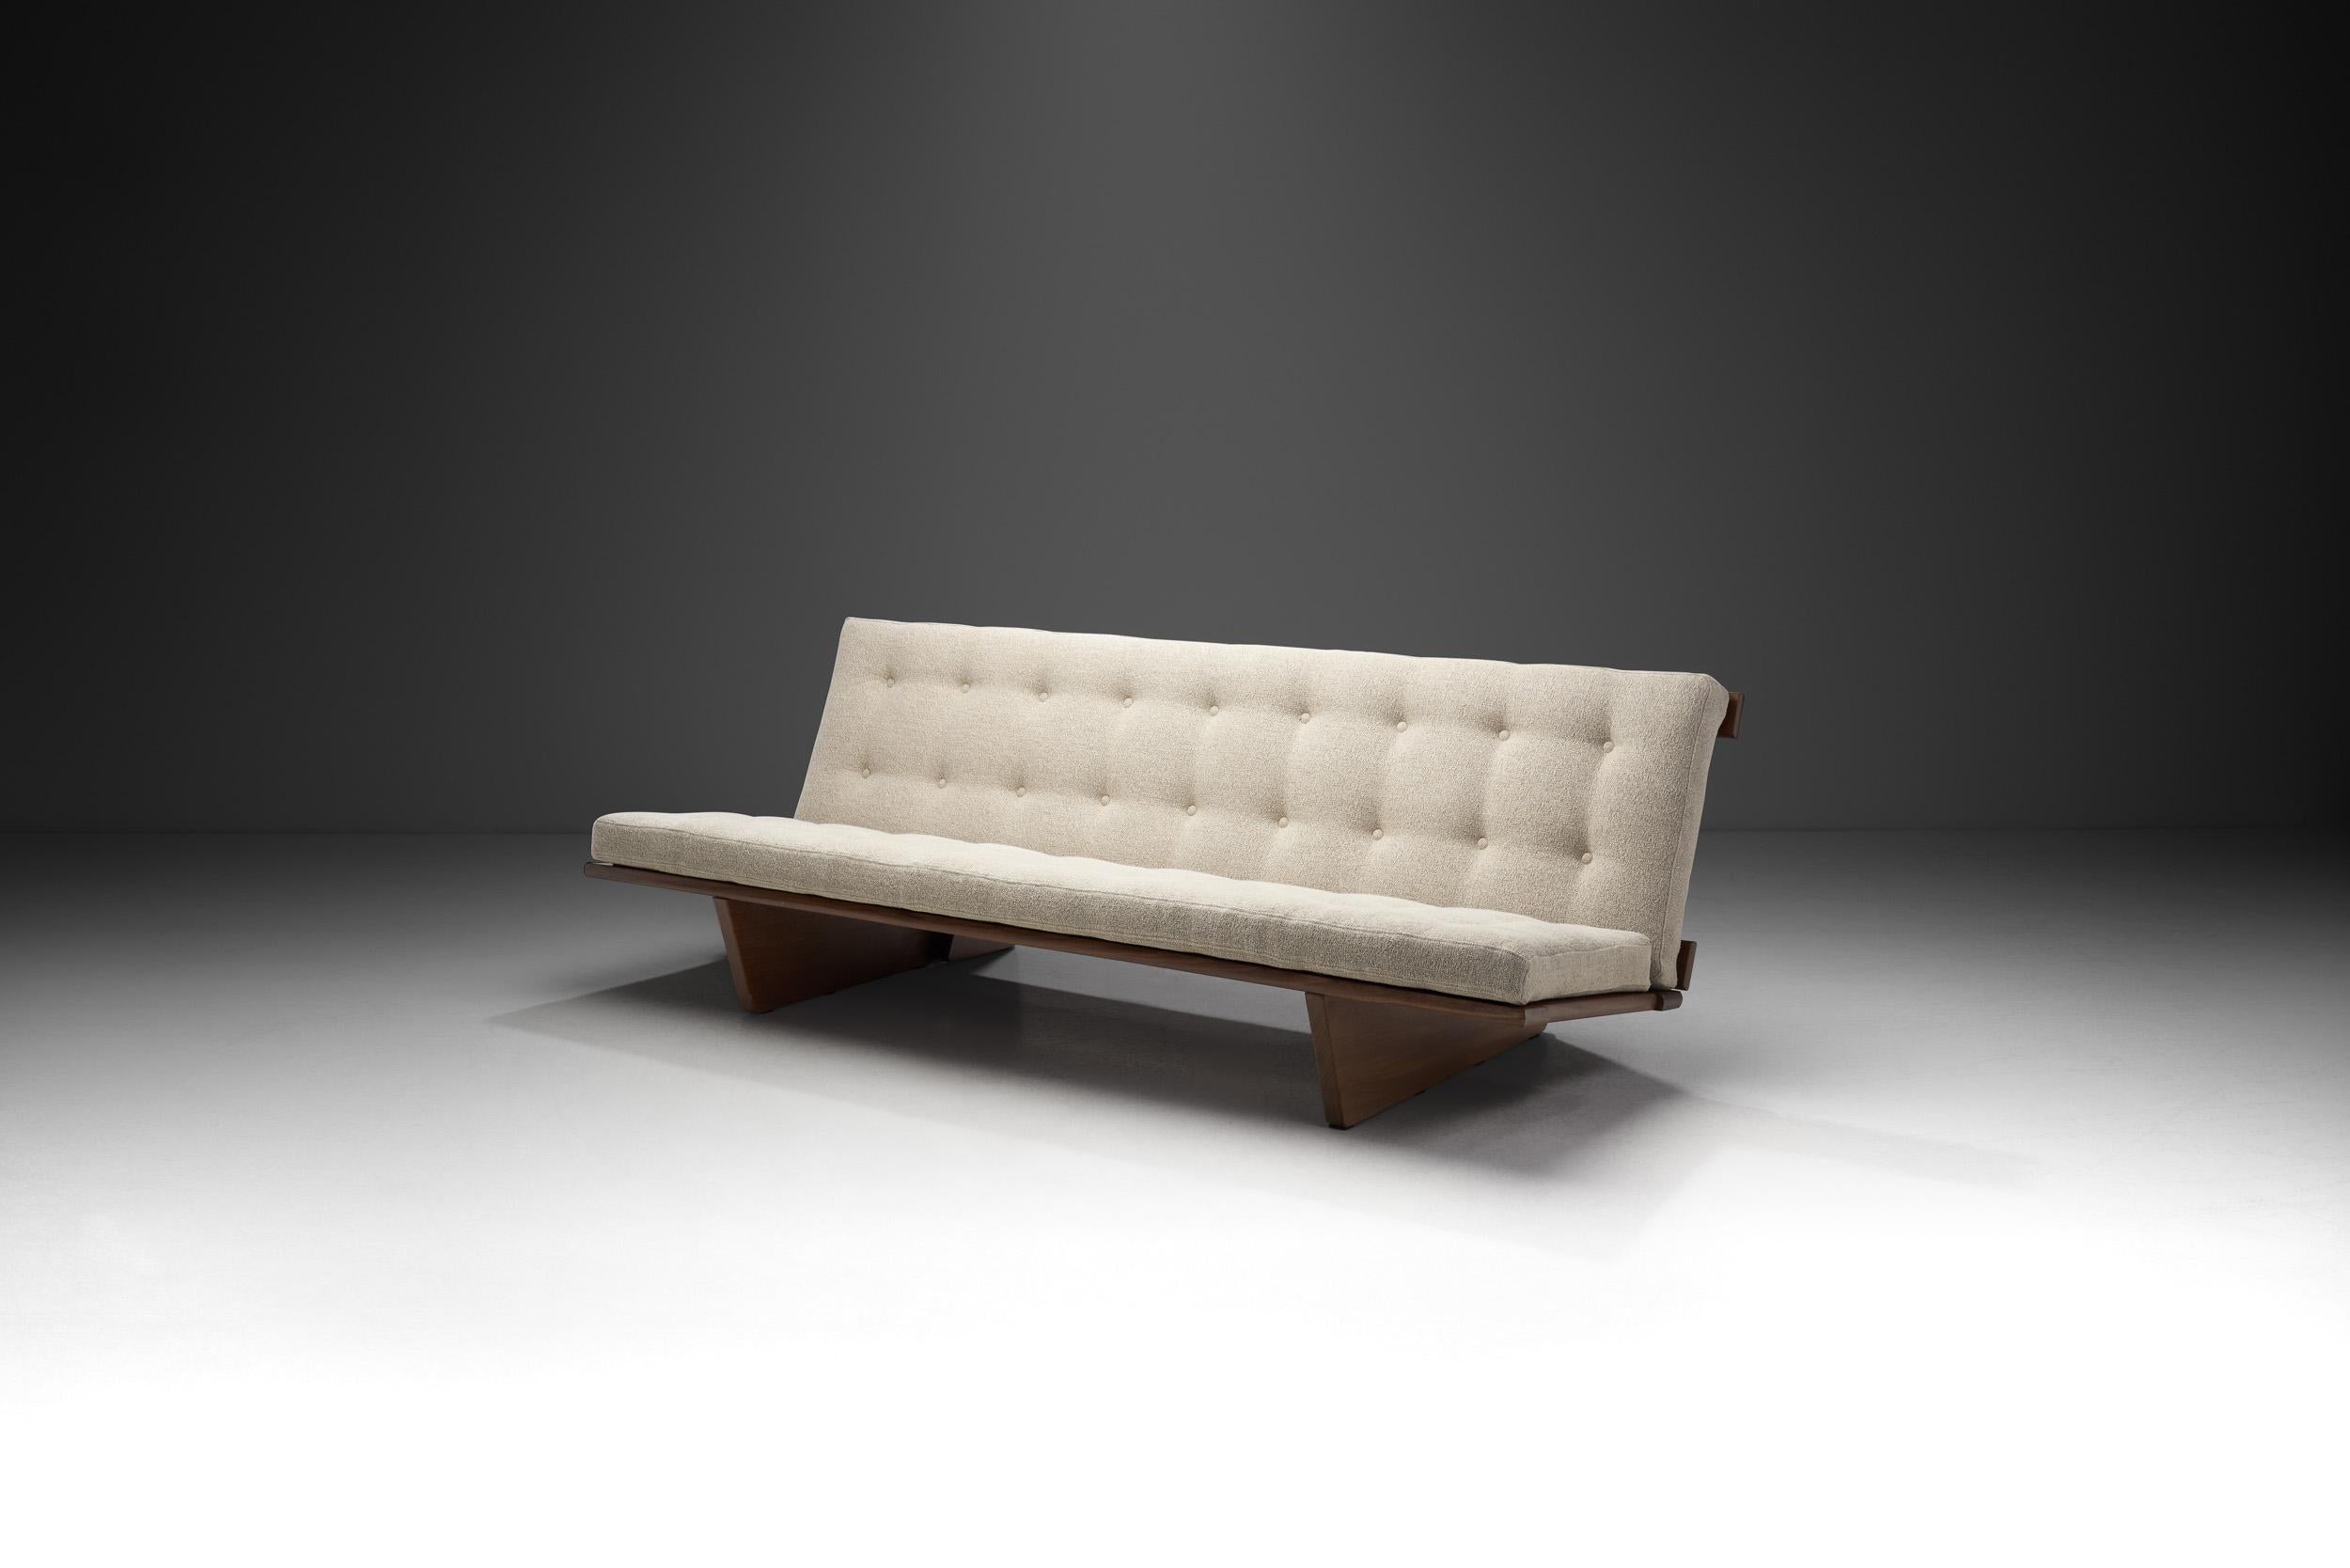 This rare sofa and daybed was made by Danish designer, Harbo Sølvsten, and is an exquisite piece of Danish Modern design history. While pieces from the Midcentury era are generally characterized by clarity in design and extremely high-quality